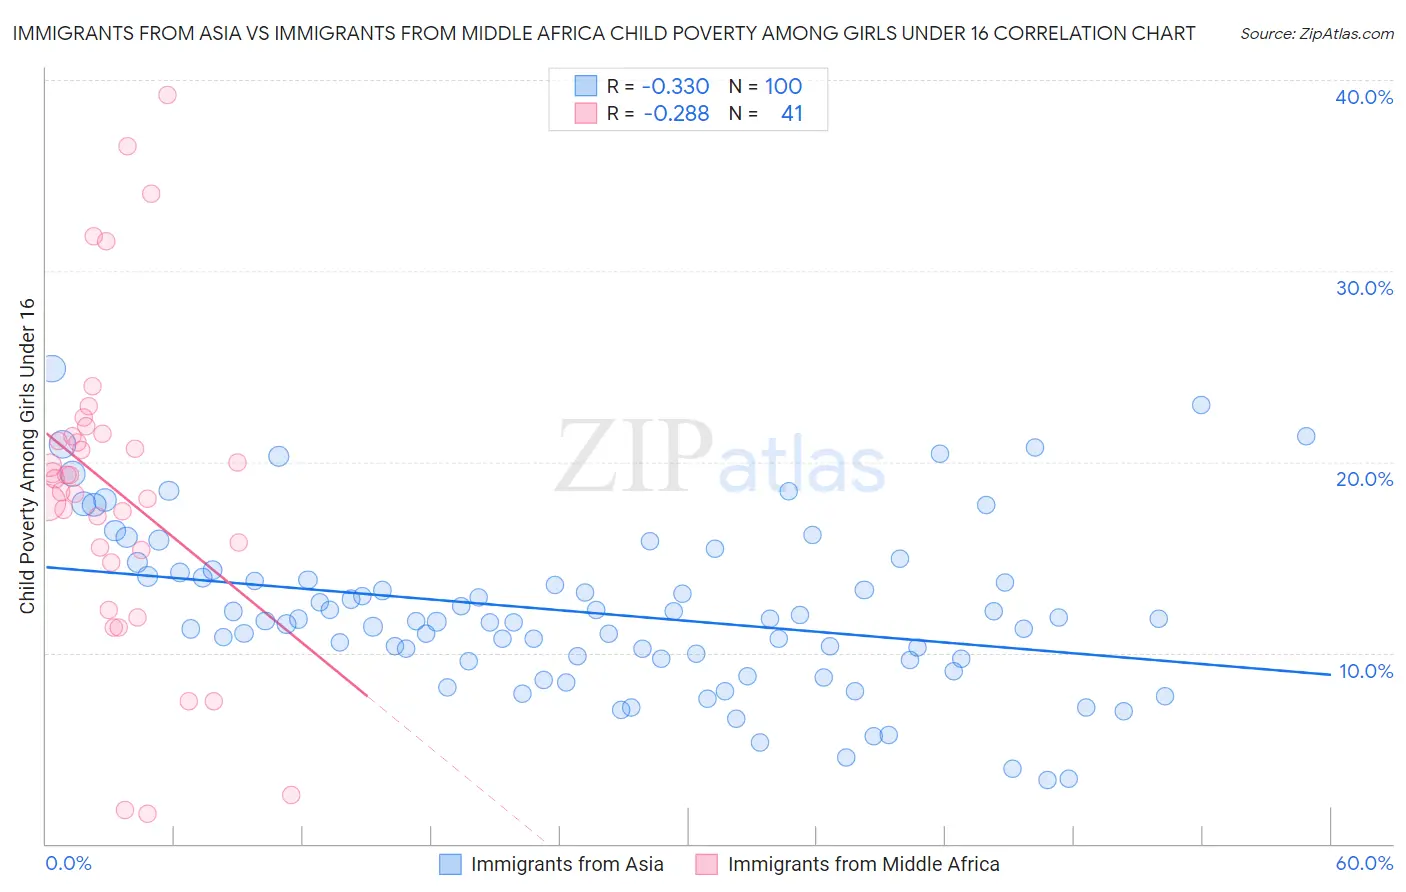 Immigrants from Asia vs Immigrants from Middle Africa Child Poverty Among Girls Under 16